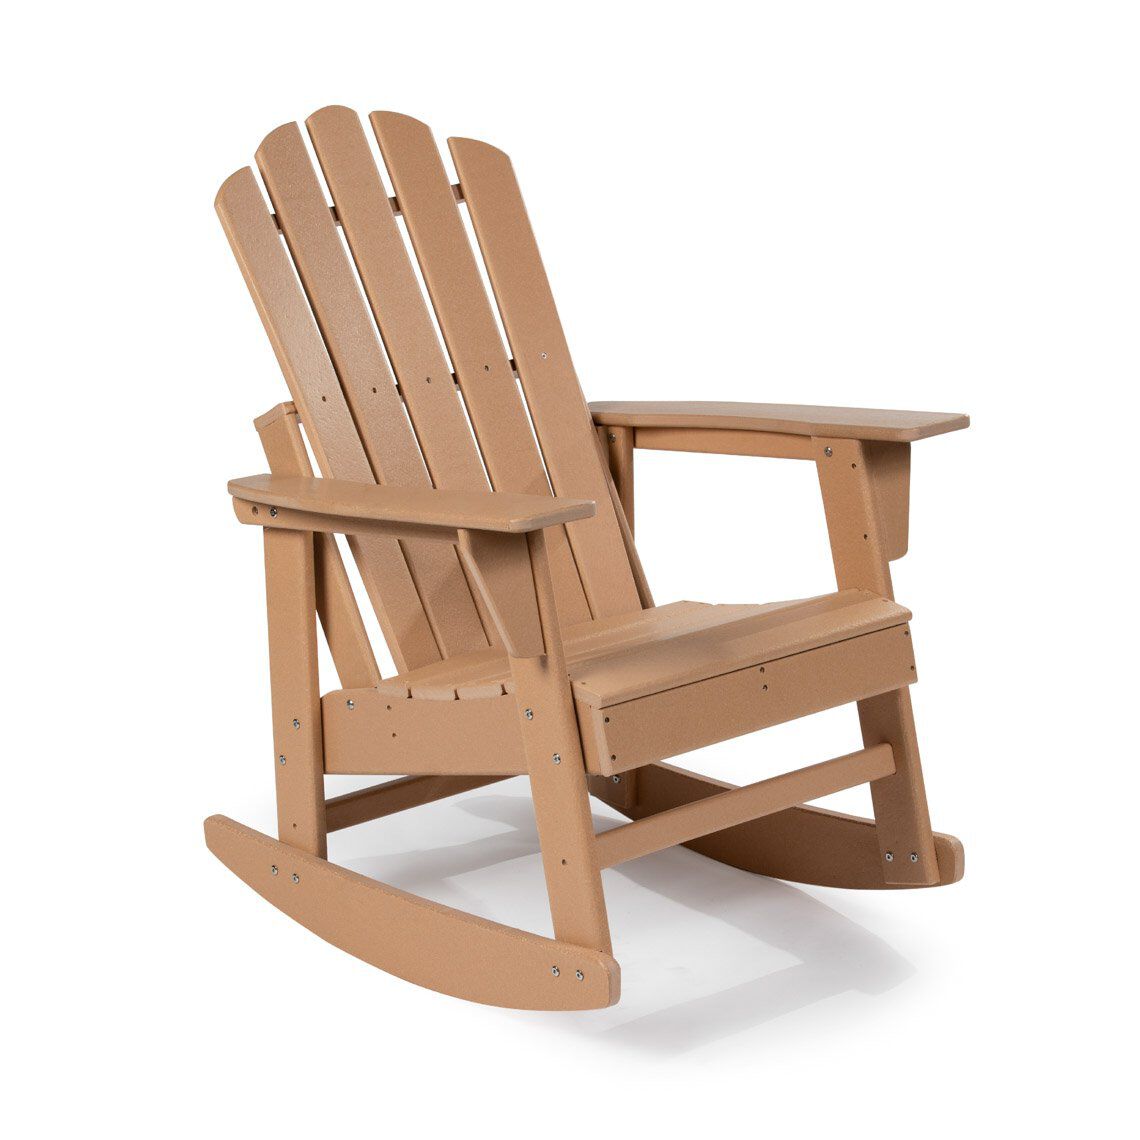 SCRATCH AND DENT - Everwood Hilltop Adirondack Rocking Chair - FINAL SALE - view 1